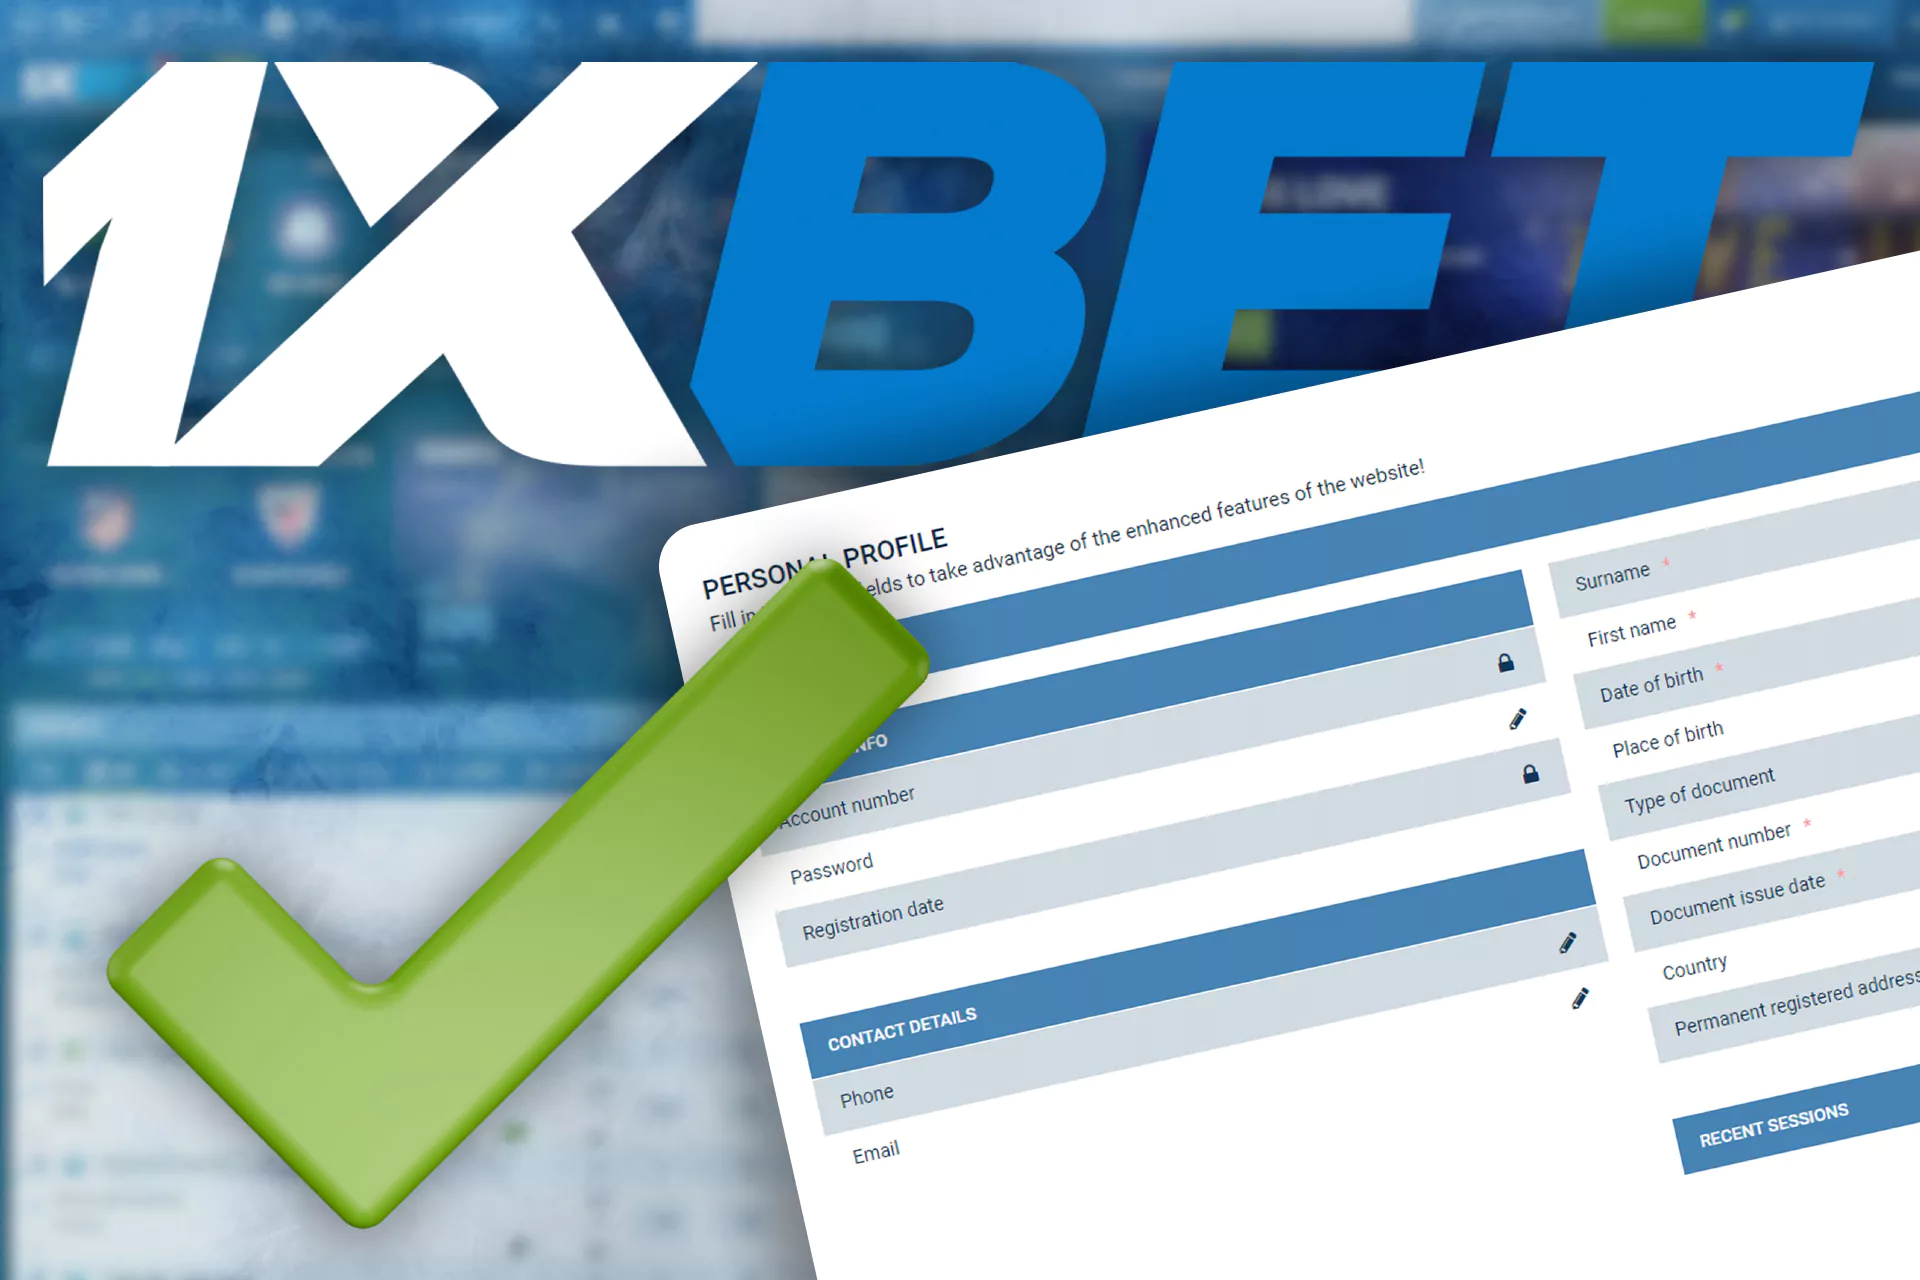 After you register, verify your new account according to the 1xBet rules.